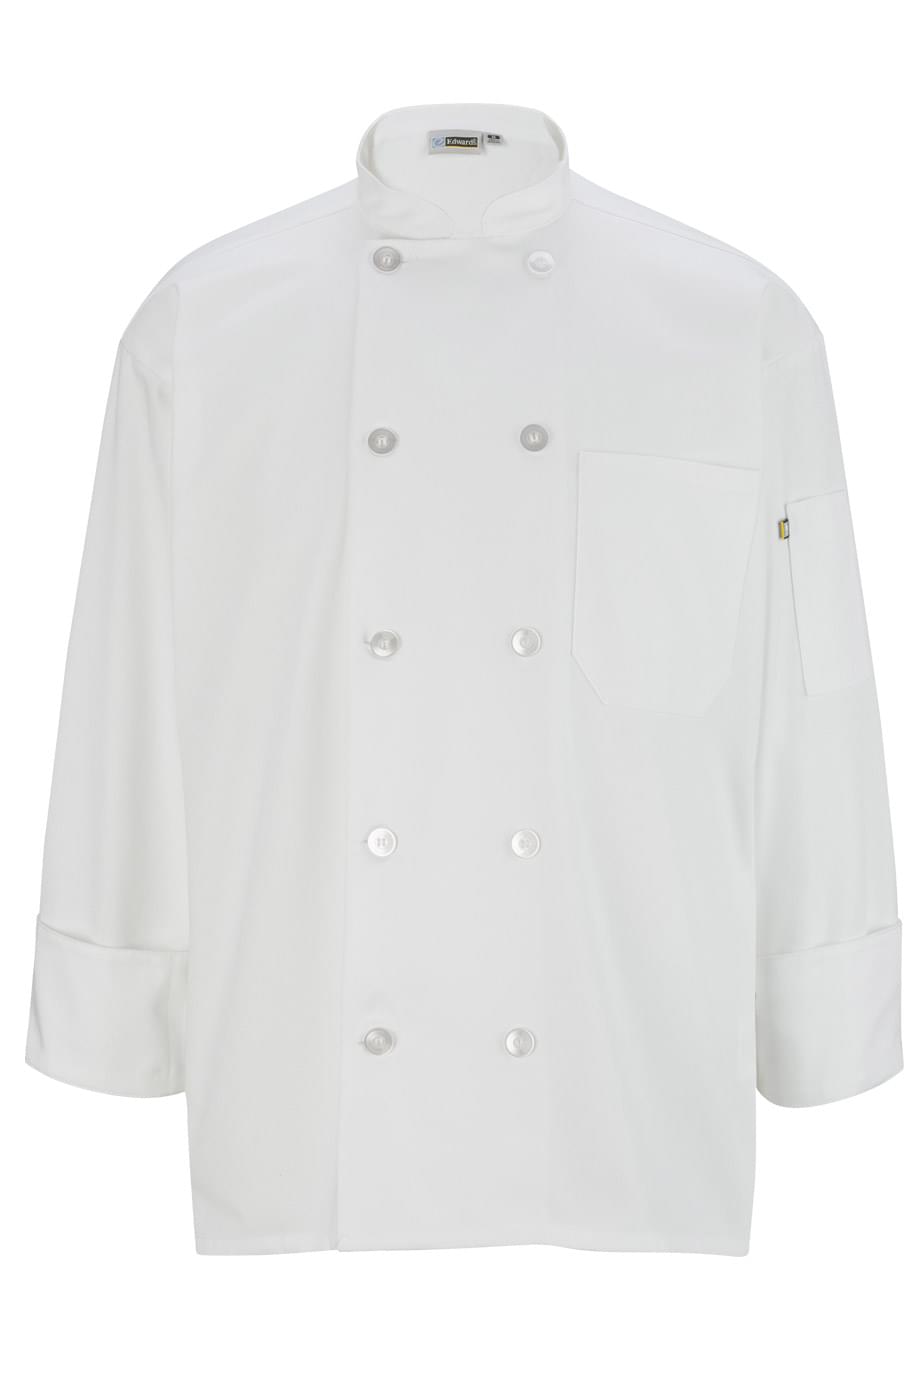 0402 Free Shipping XS to 3XL Classic 10 Button Chef Coat White 